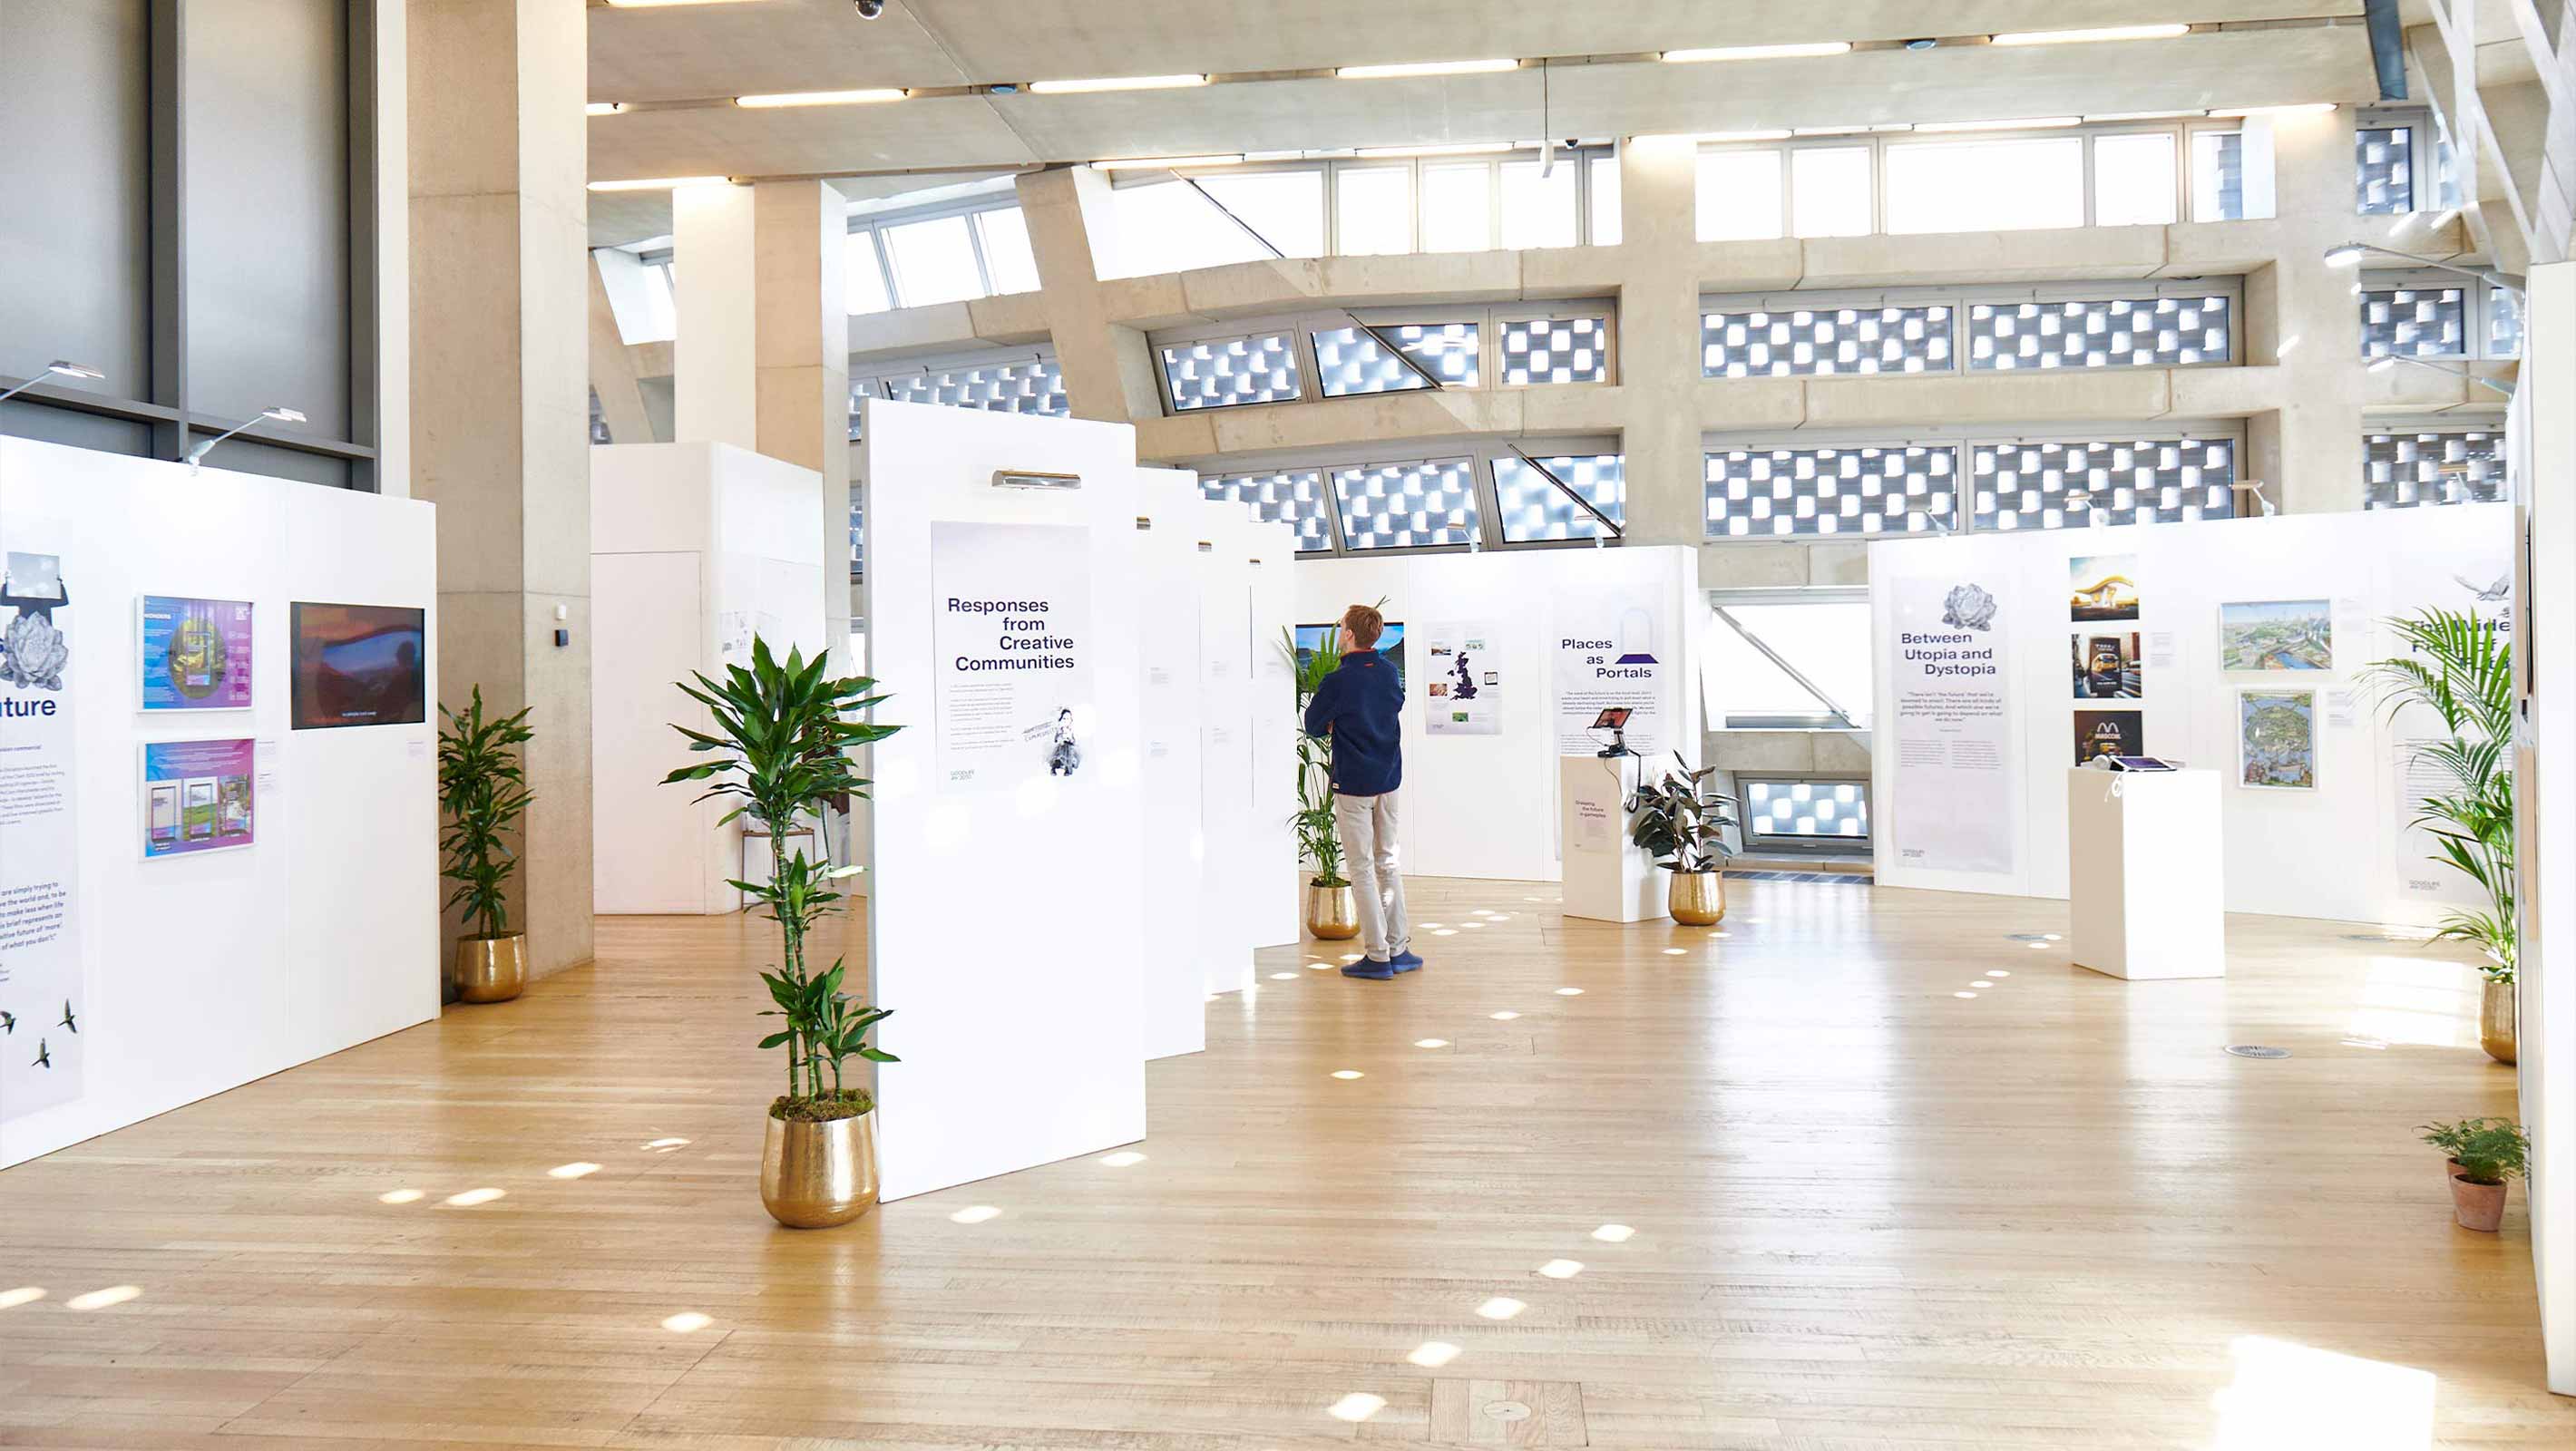 A photo of the exhibition during earth day advertising summit at Tate Modern London.